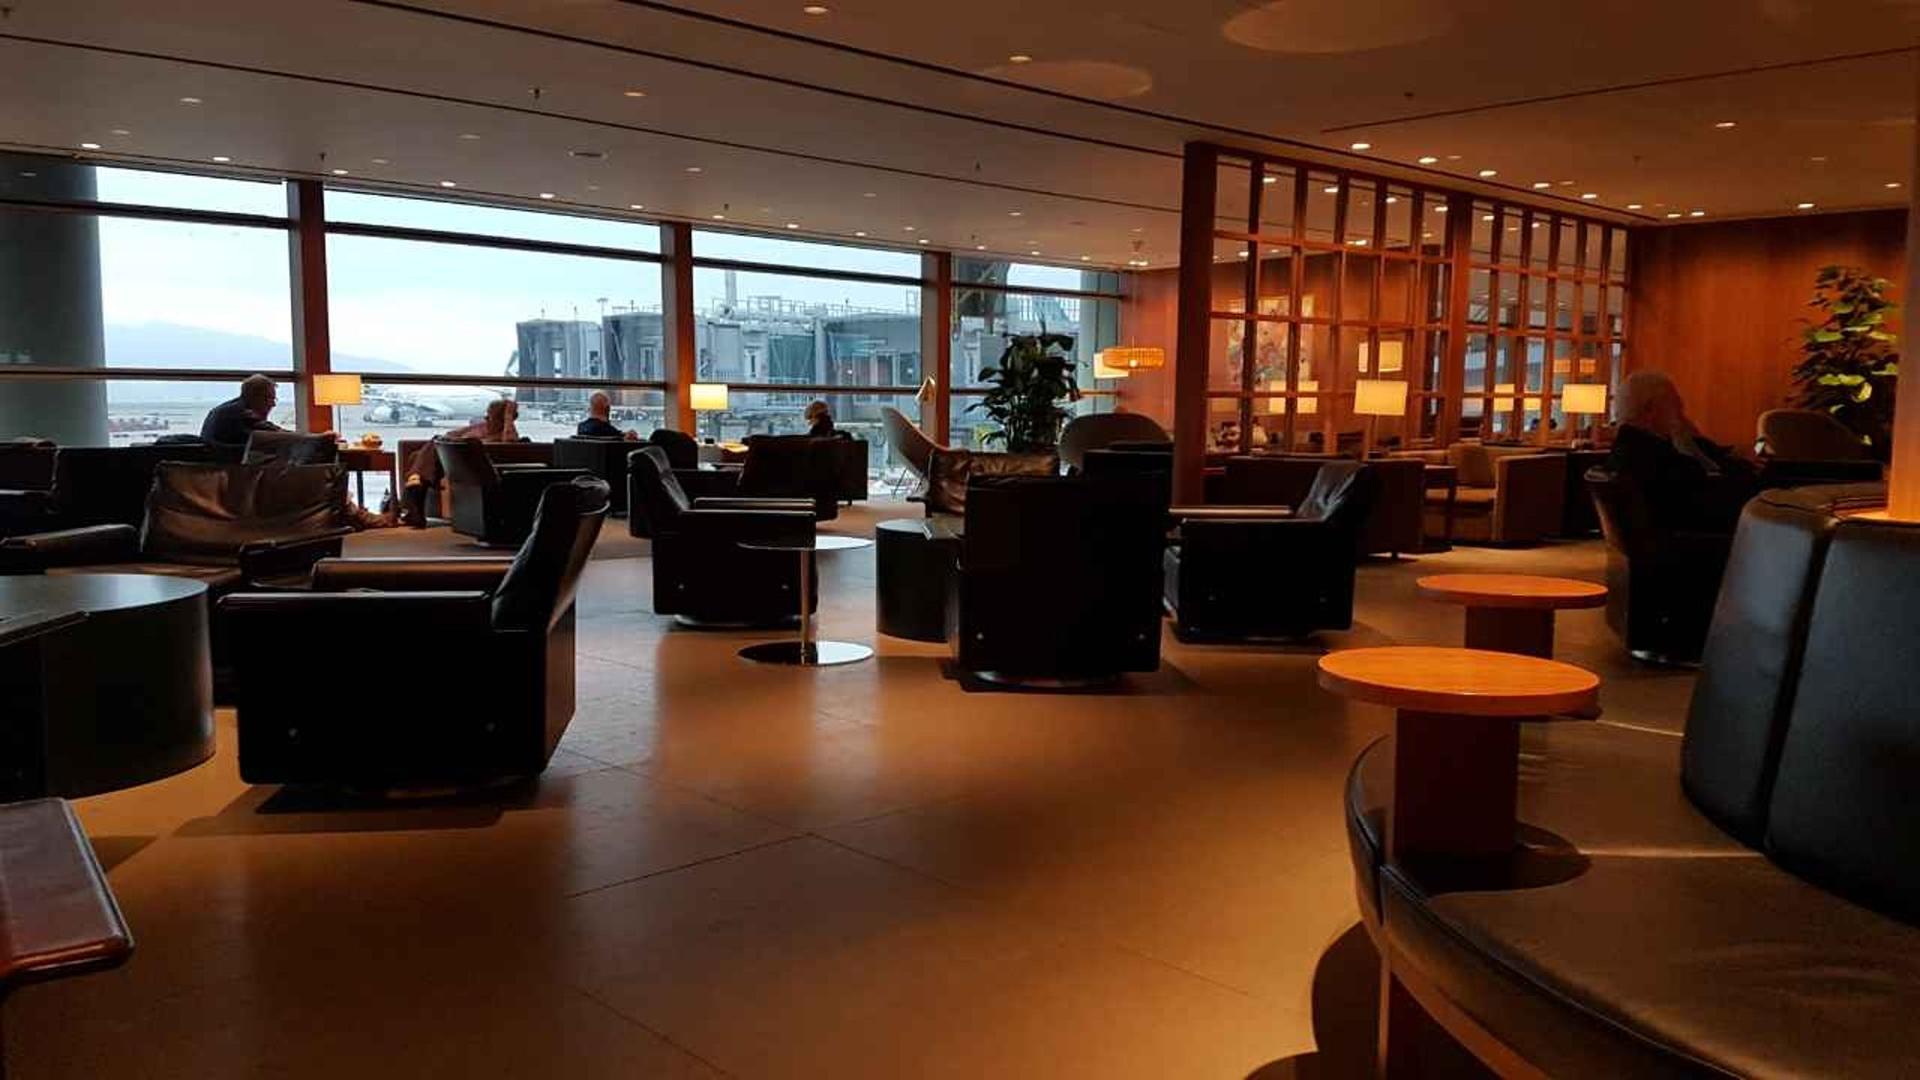 Cathay Pacific The Pier Business Class Lounge image 24 of 61